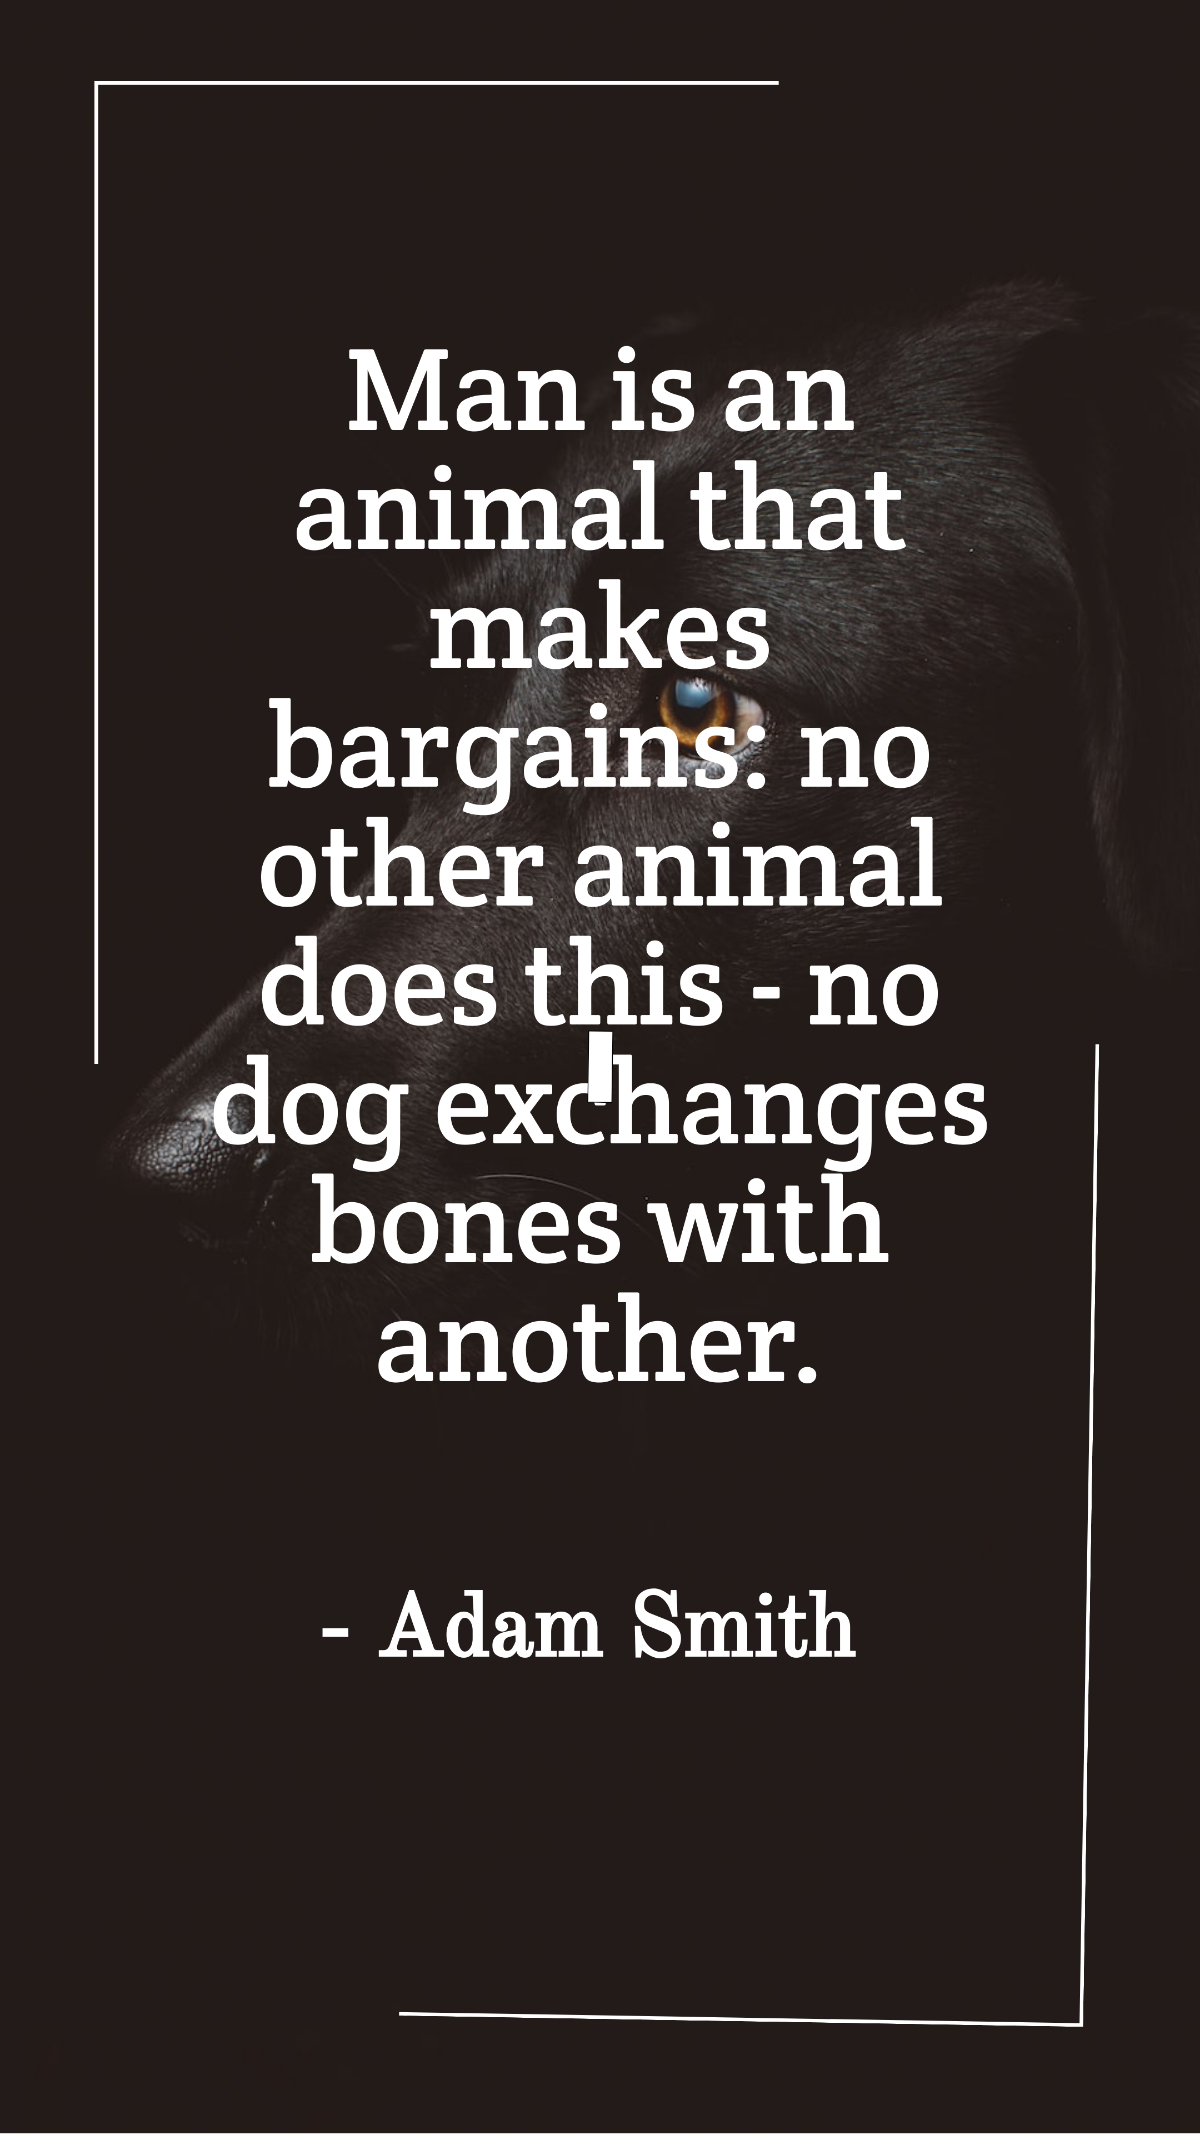 Adam Smith - Man is an animal that makes bargains: no other animal does this - no dog exchanges bones with another.